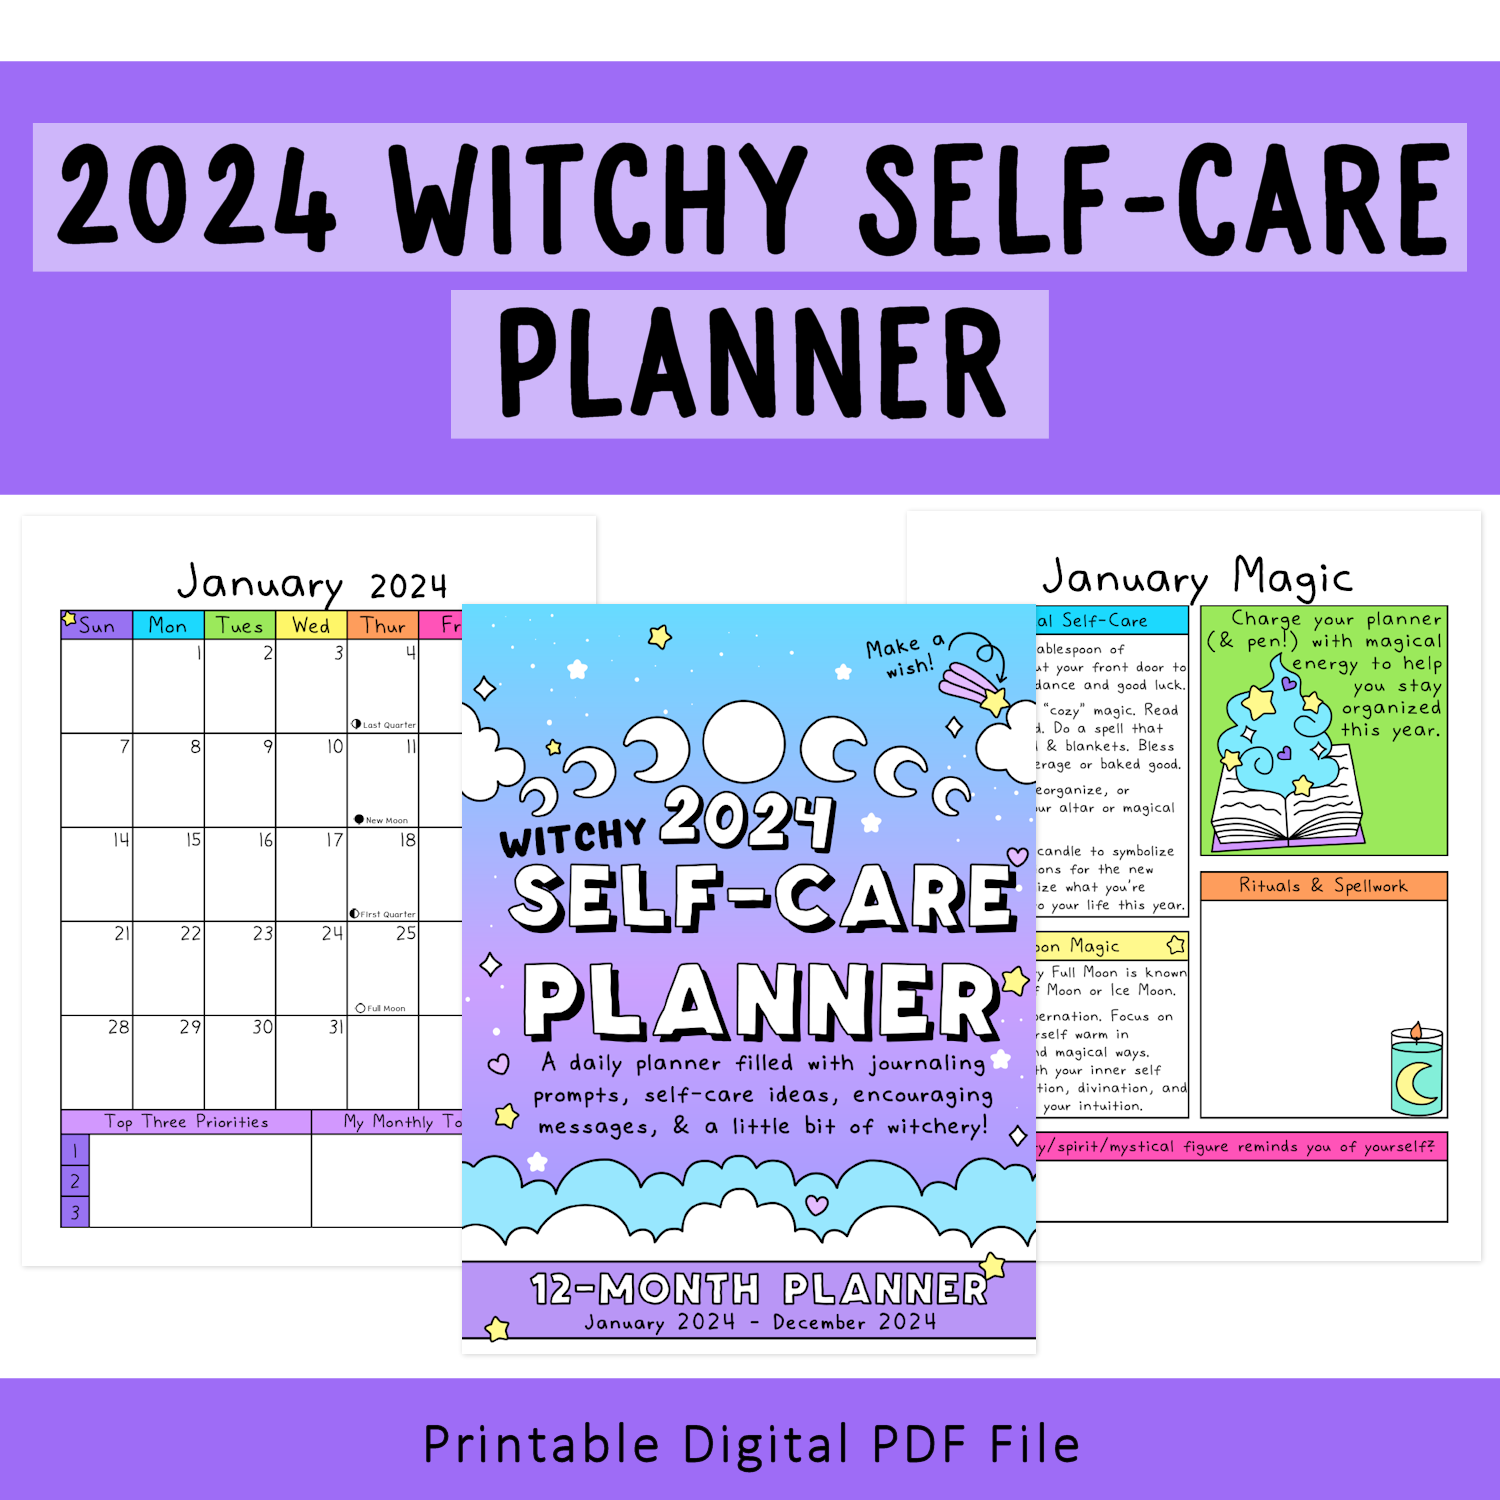 Guided by Tarot (2024 Weekly Planner): July 2023 - December 2024